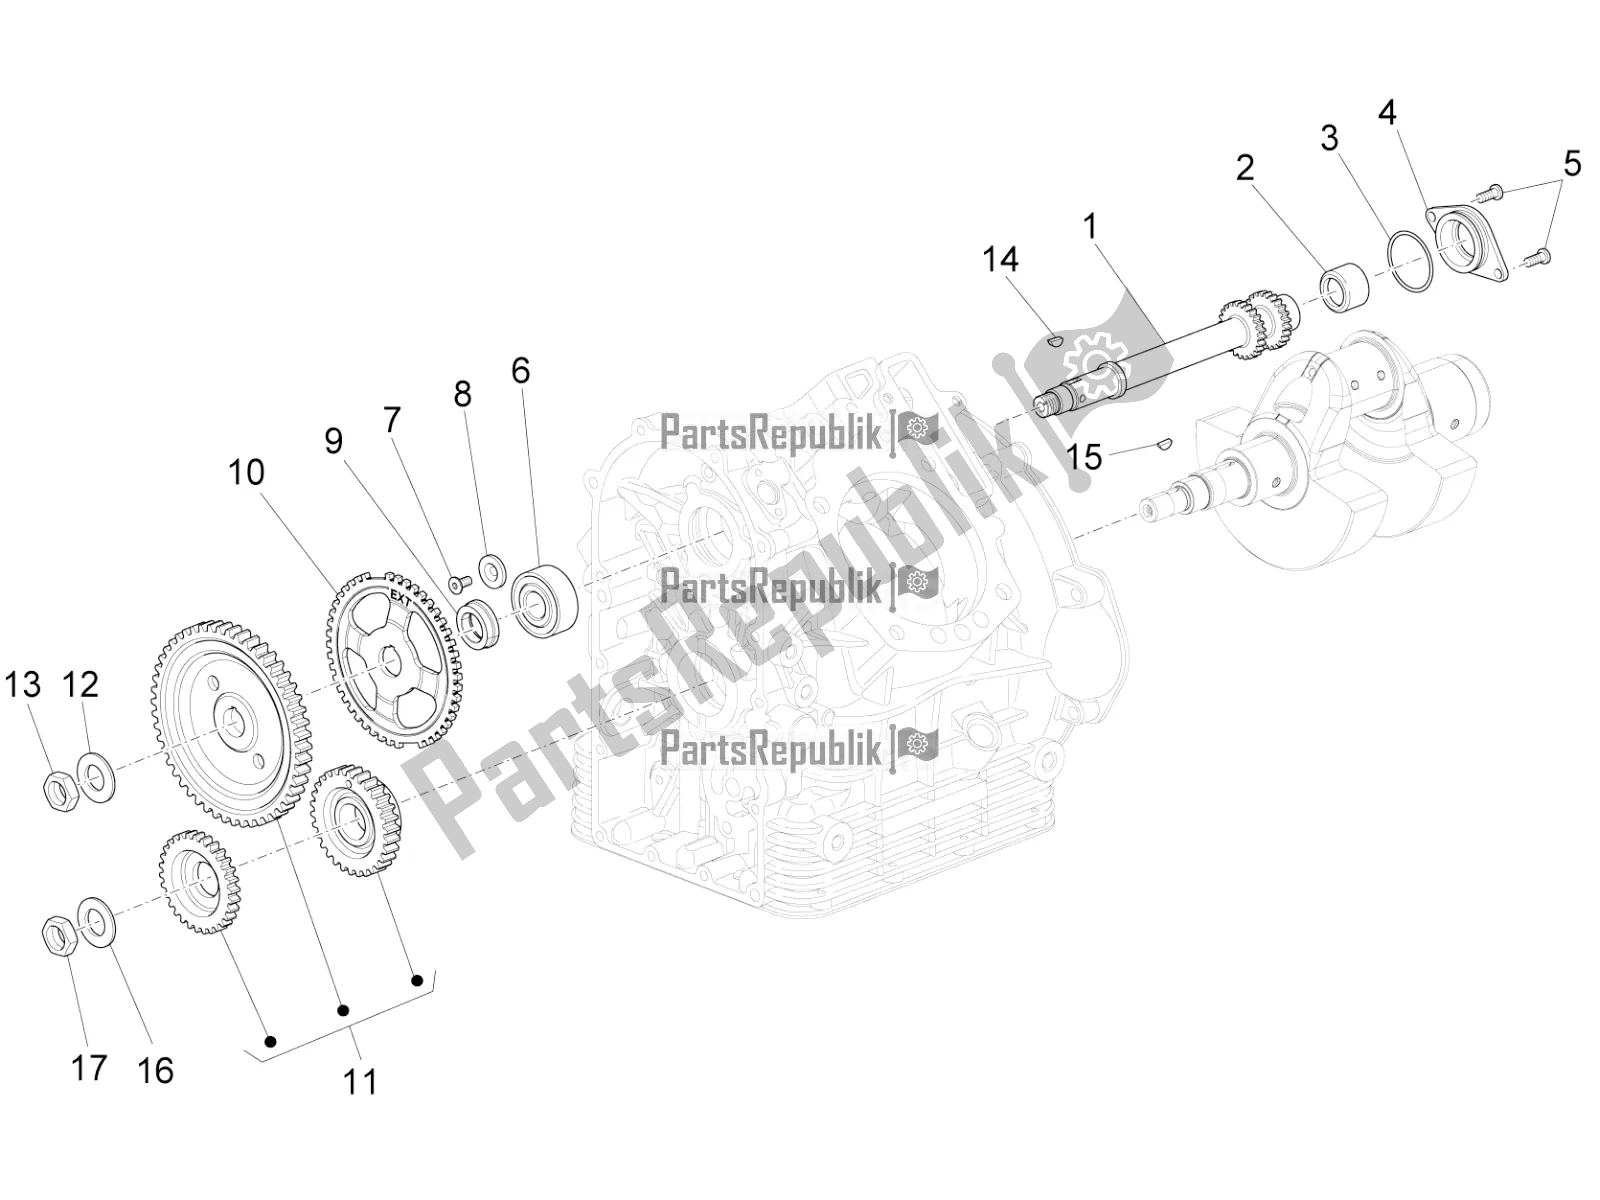 All parts for the Timing System of the Moto-Guzzi California 1400 Touring ABS Apac 2021